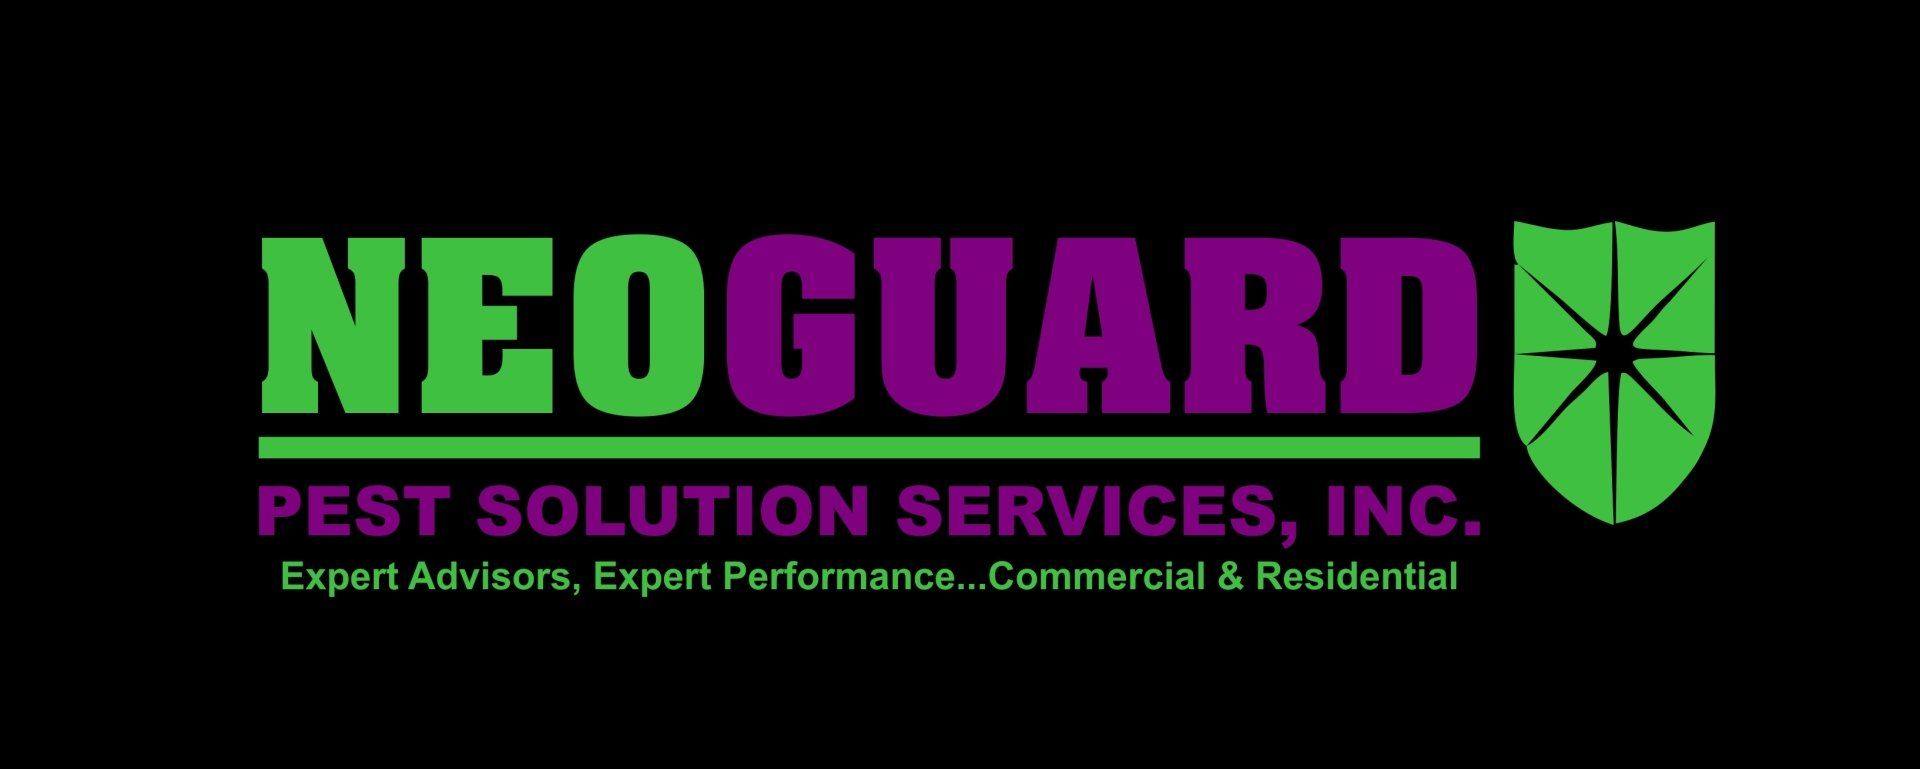 The NeoGuard logo for Neoguard pest solution services inc.